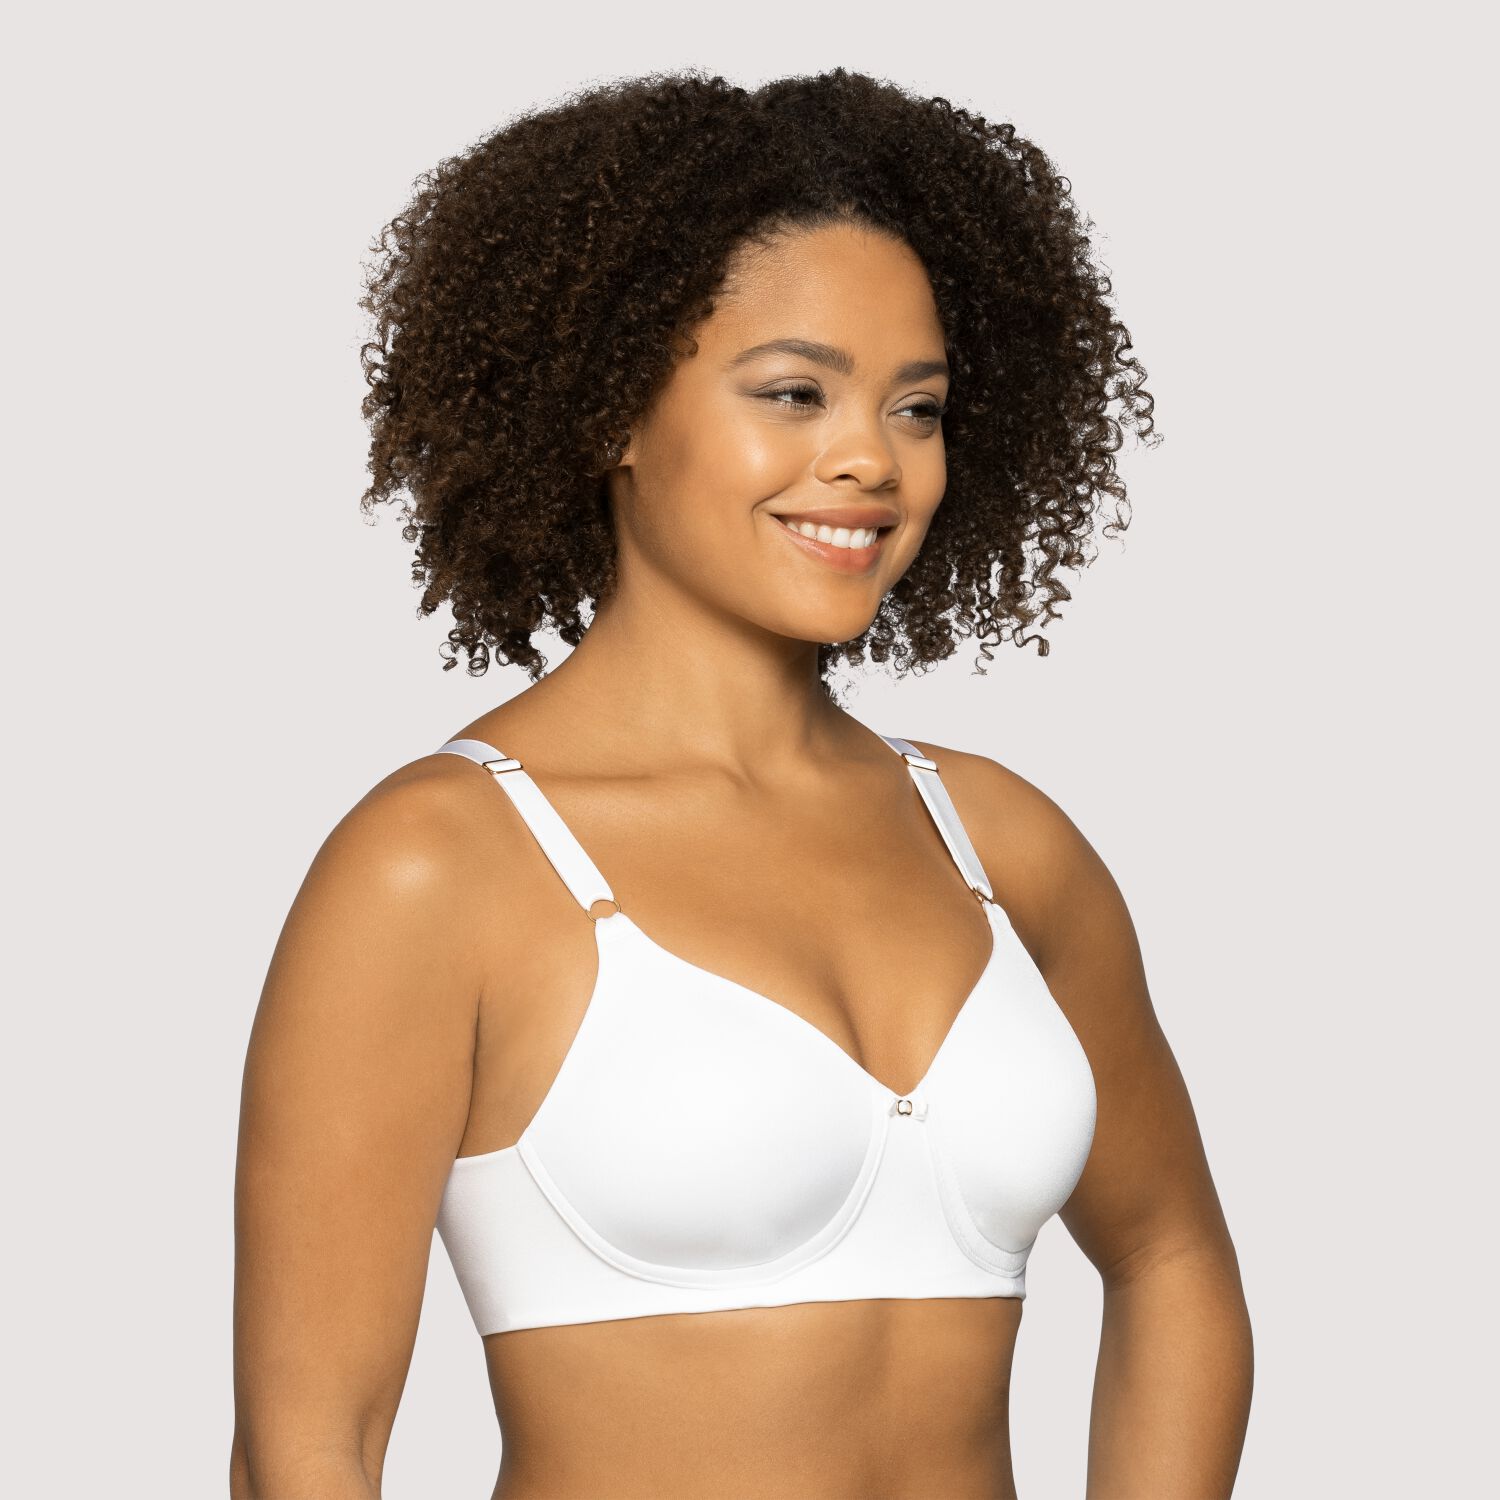 WOMENS 34 FRUIT OF THE LOOM COMFORT FRONT CLOSURE SPORTS BRA 2-PACK.  BLACK/WHITE